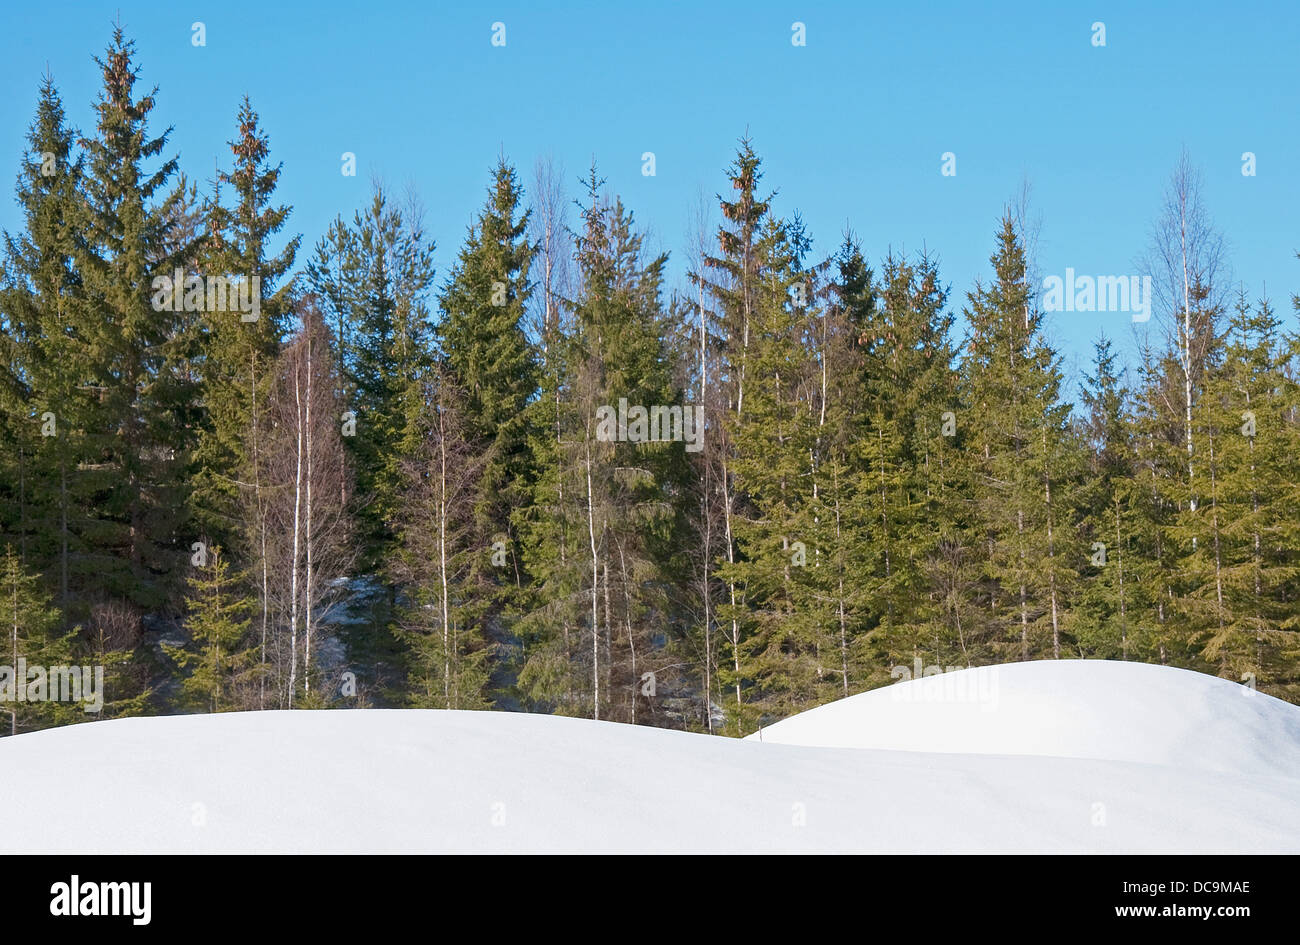 Spruce forest Stock Photo